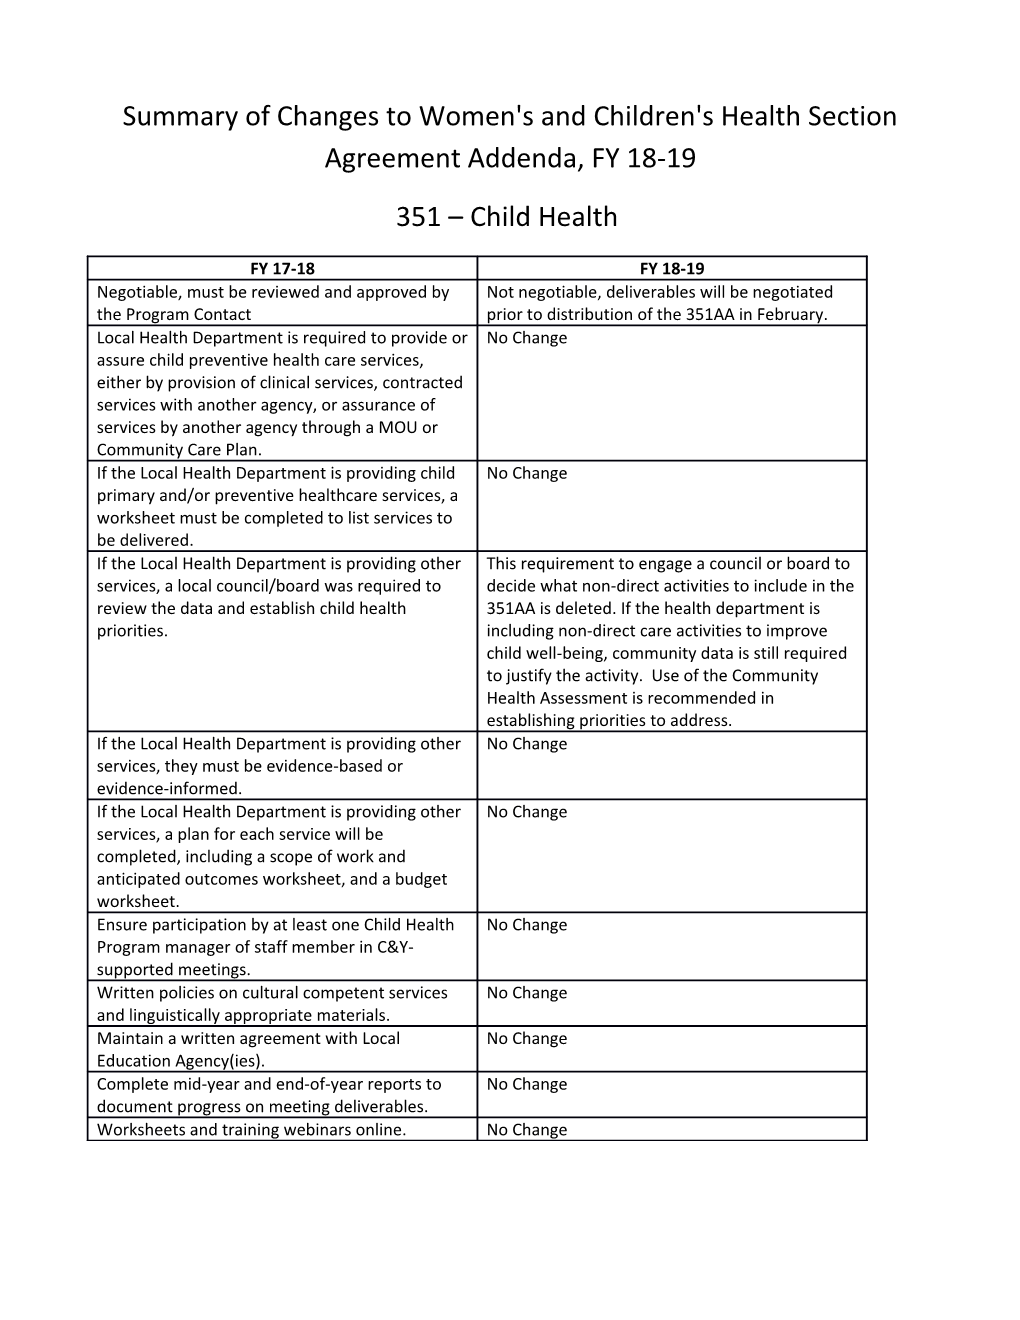 Summary of Changes to Women's and Children's Health Section Agreement Addenda, FY 18-19